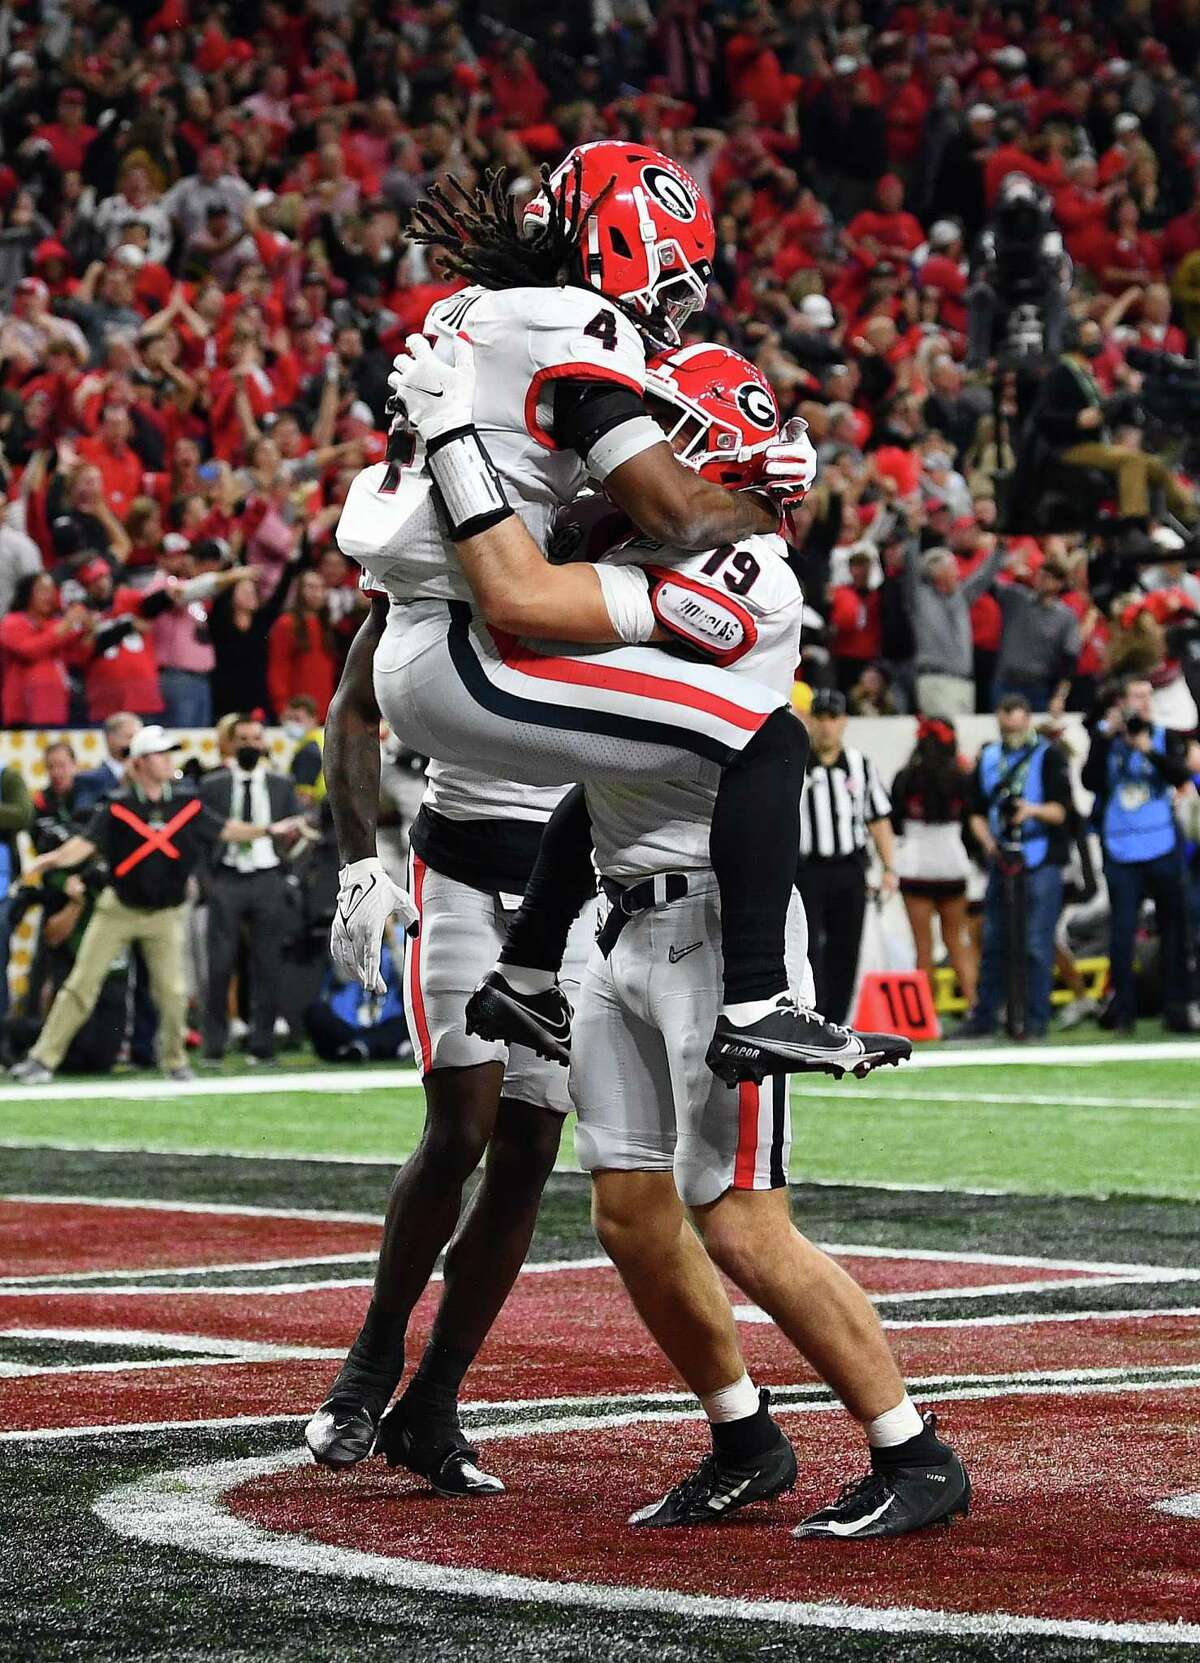 INDIANAPOLIS, INDIANA - JANUARY 10: Brock Bowers #19 of the Georgia Bulldogs reacts to scoring a touchdown with teammates in the fourth quarter against the Alabama Crimson Tide during the 2022 CFP National Championship Game at Lucas Oil Stadium on January 10, 2022 in Indianapolis, Indiana. (Photo by Emilee Chinn/Getty Images)